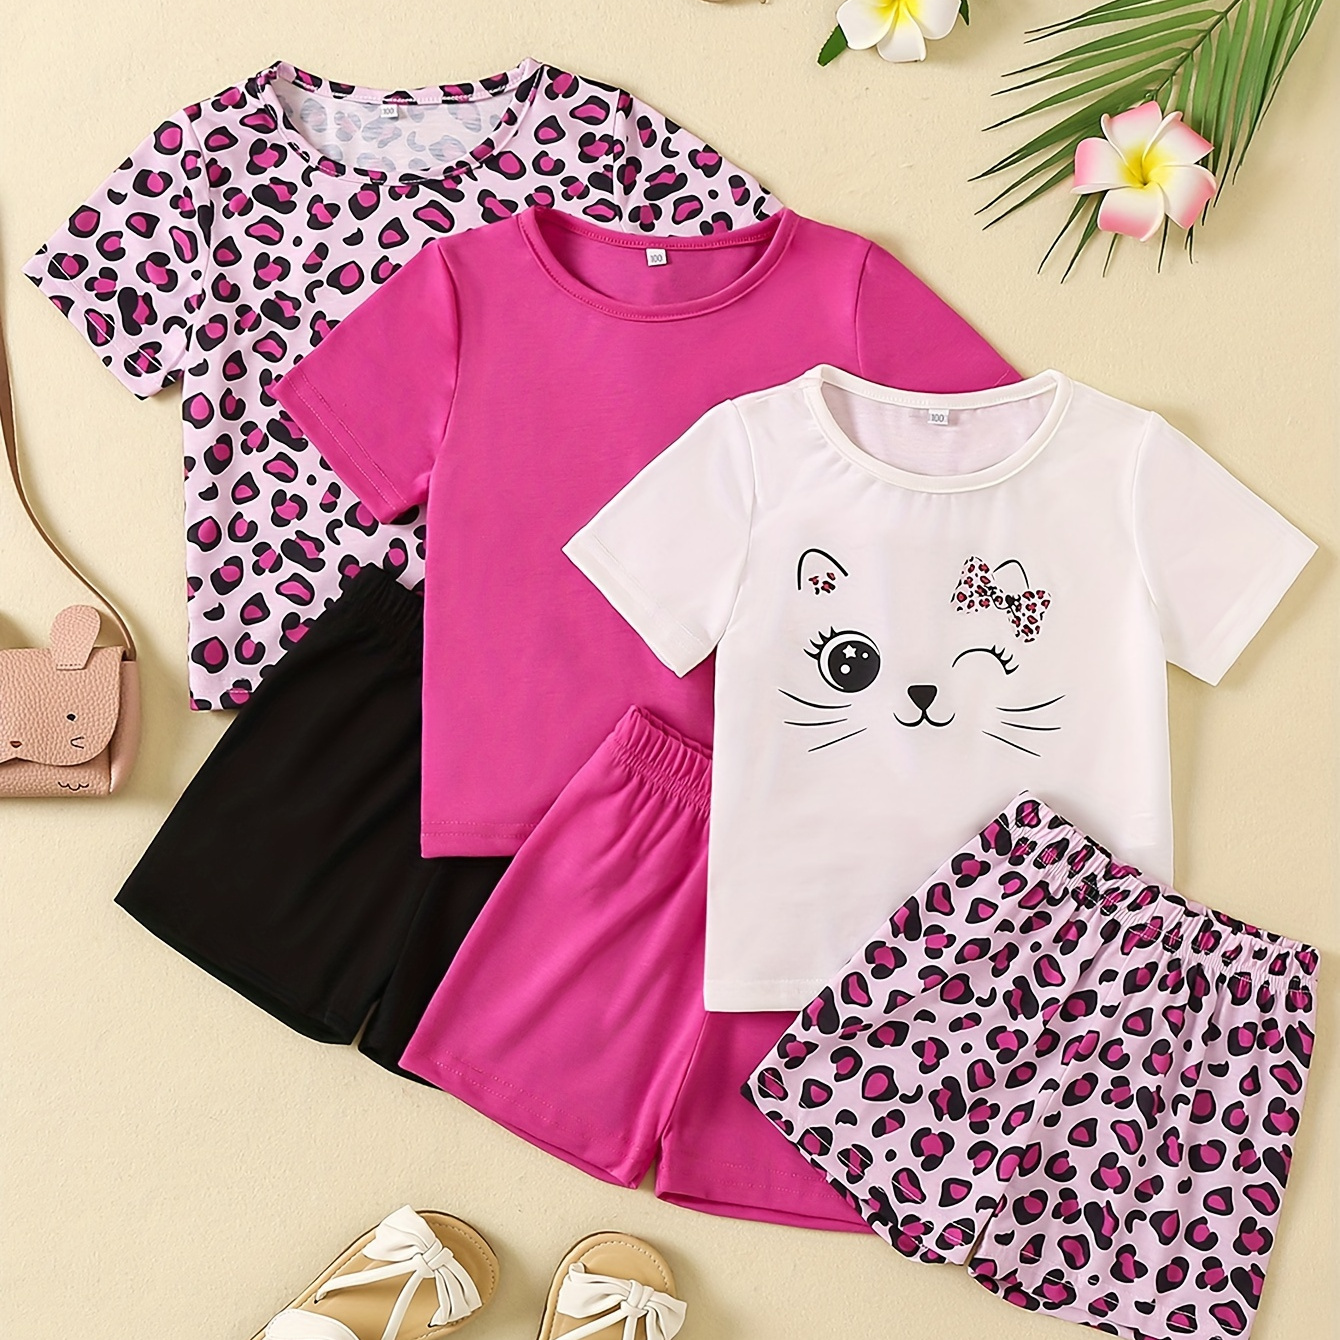 

6pcs Girls Summer New Cozy Pajama Sets – Leopard Print Kitten Pattern Short Sleeve T-shirt Top & Matching Shorts Sets, Comfy Breathable Pj Sets, Children's Easy-care Sleepwear Outfit